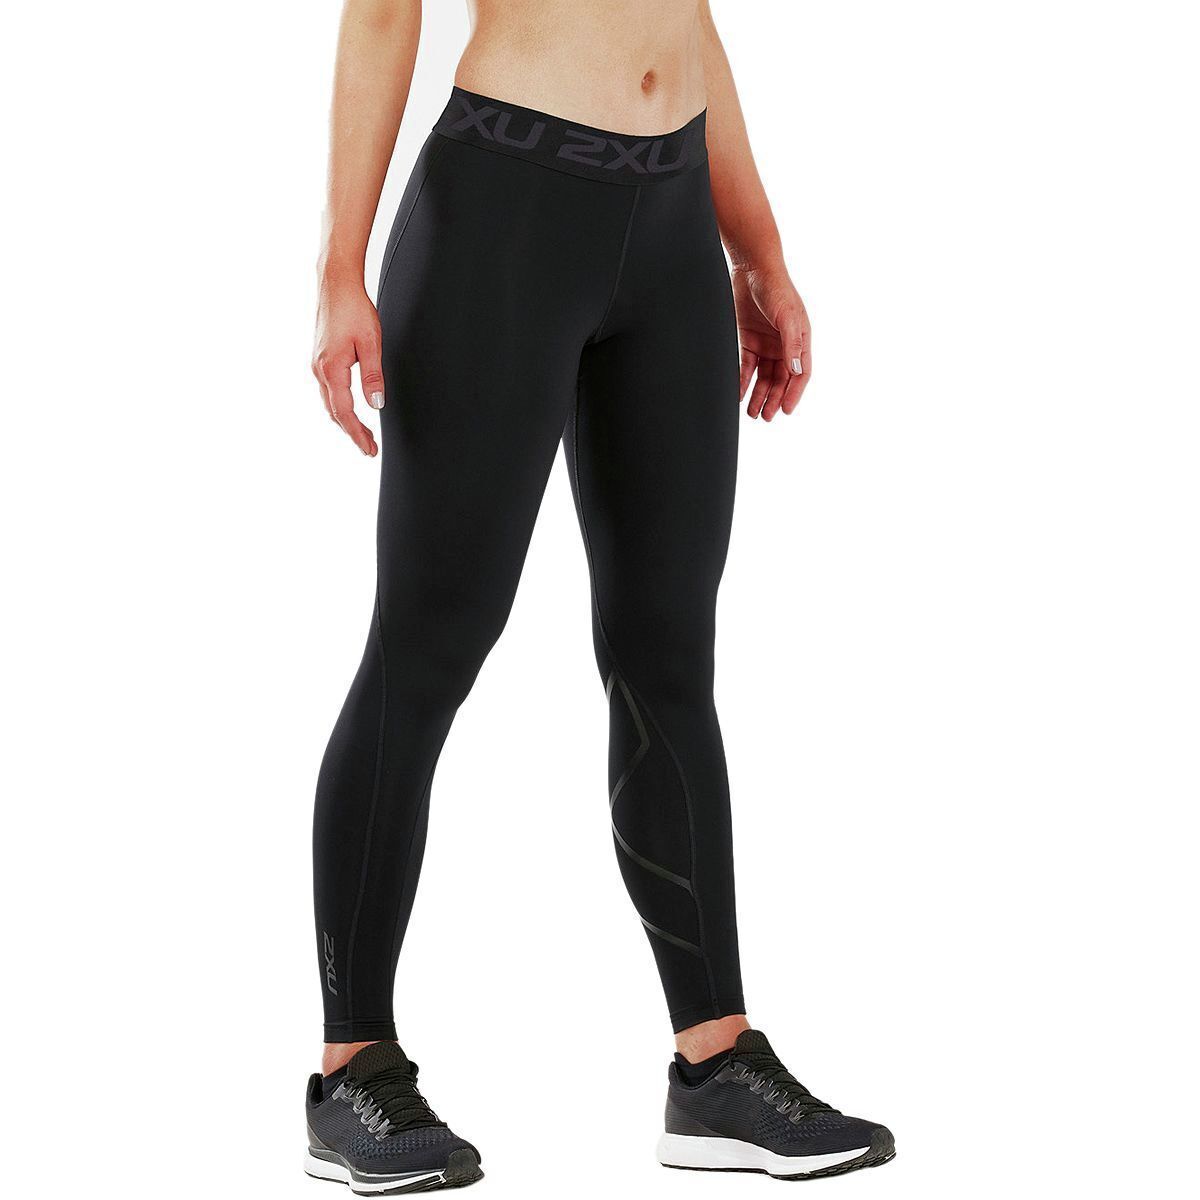 2XU Thermal Compression Tights - Women's